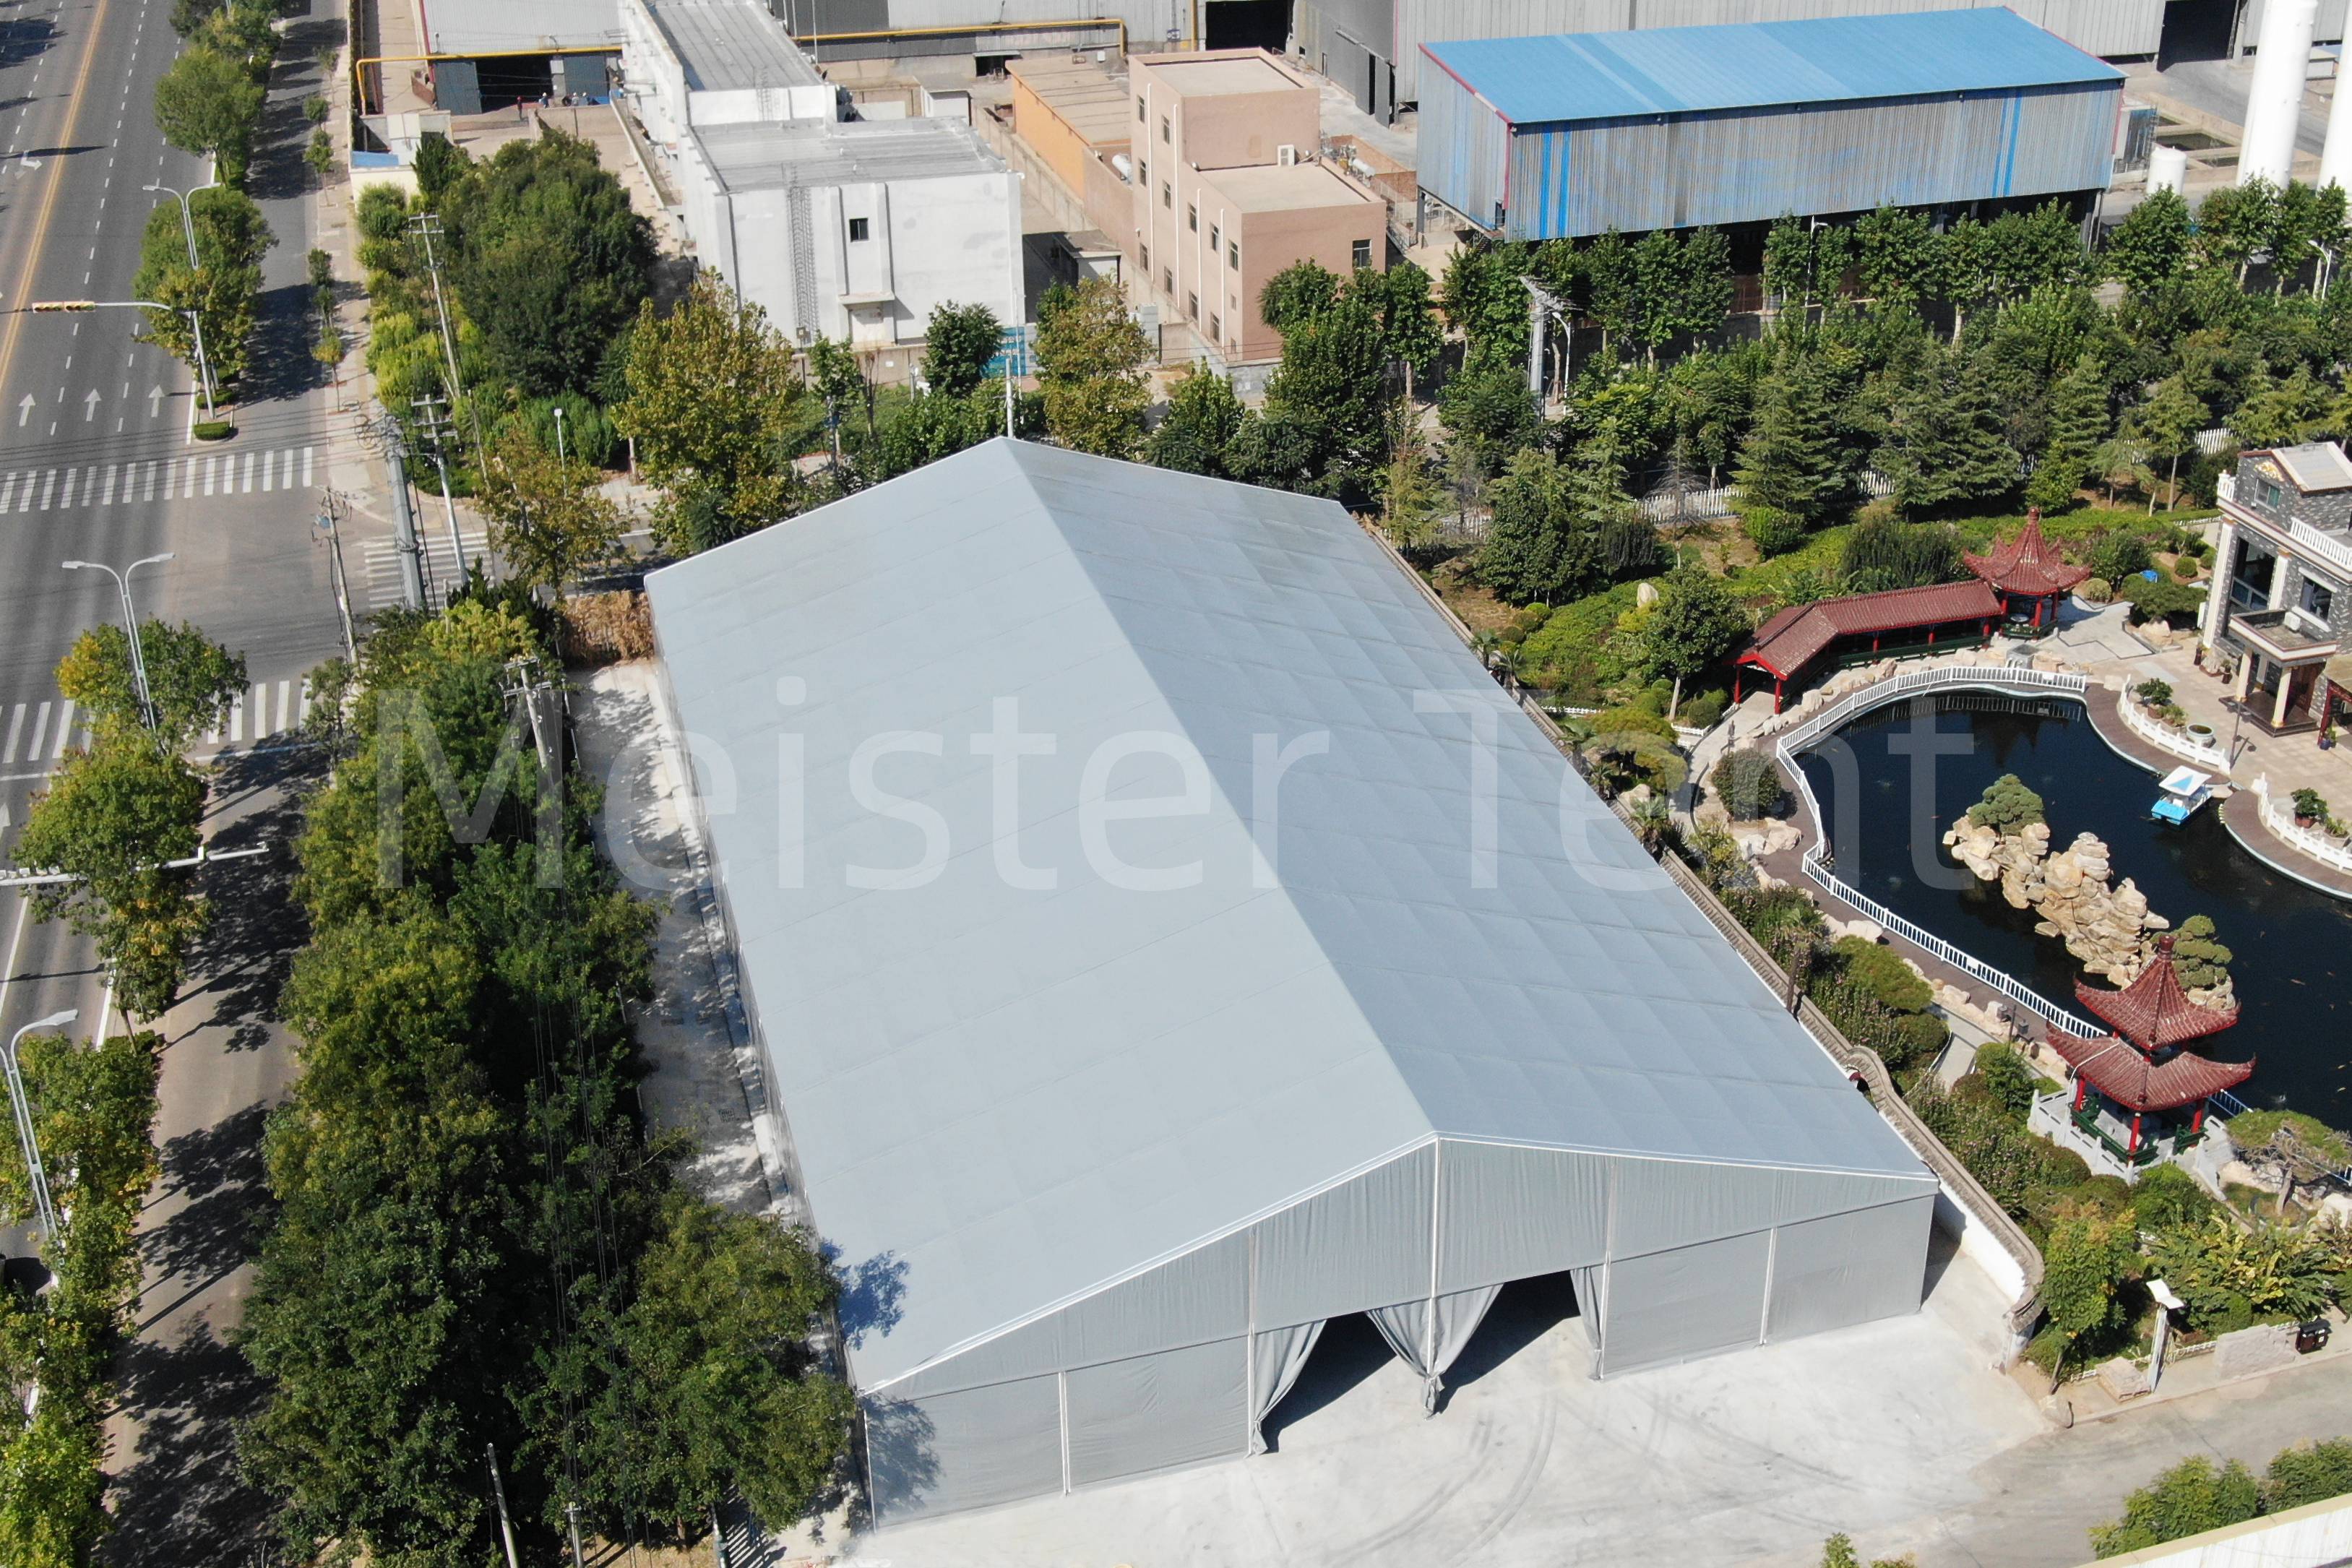 Why choose Meister warehouse tent?